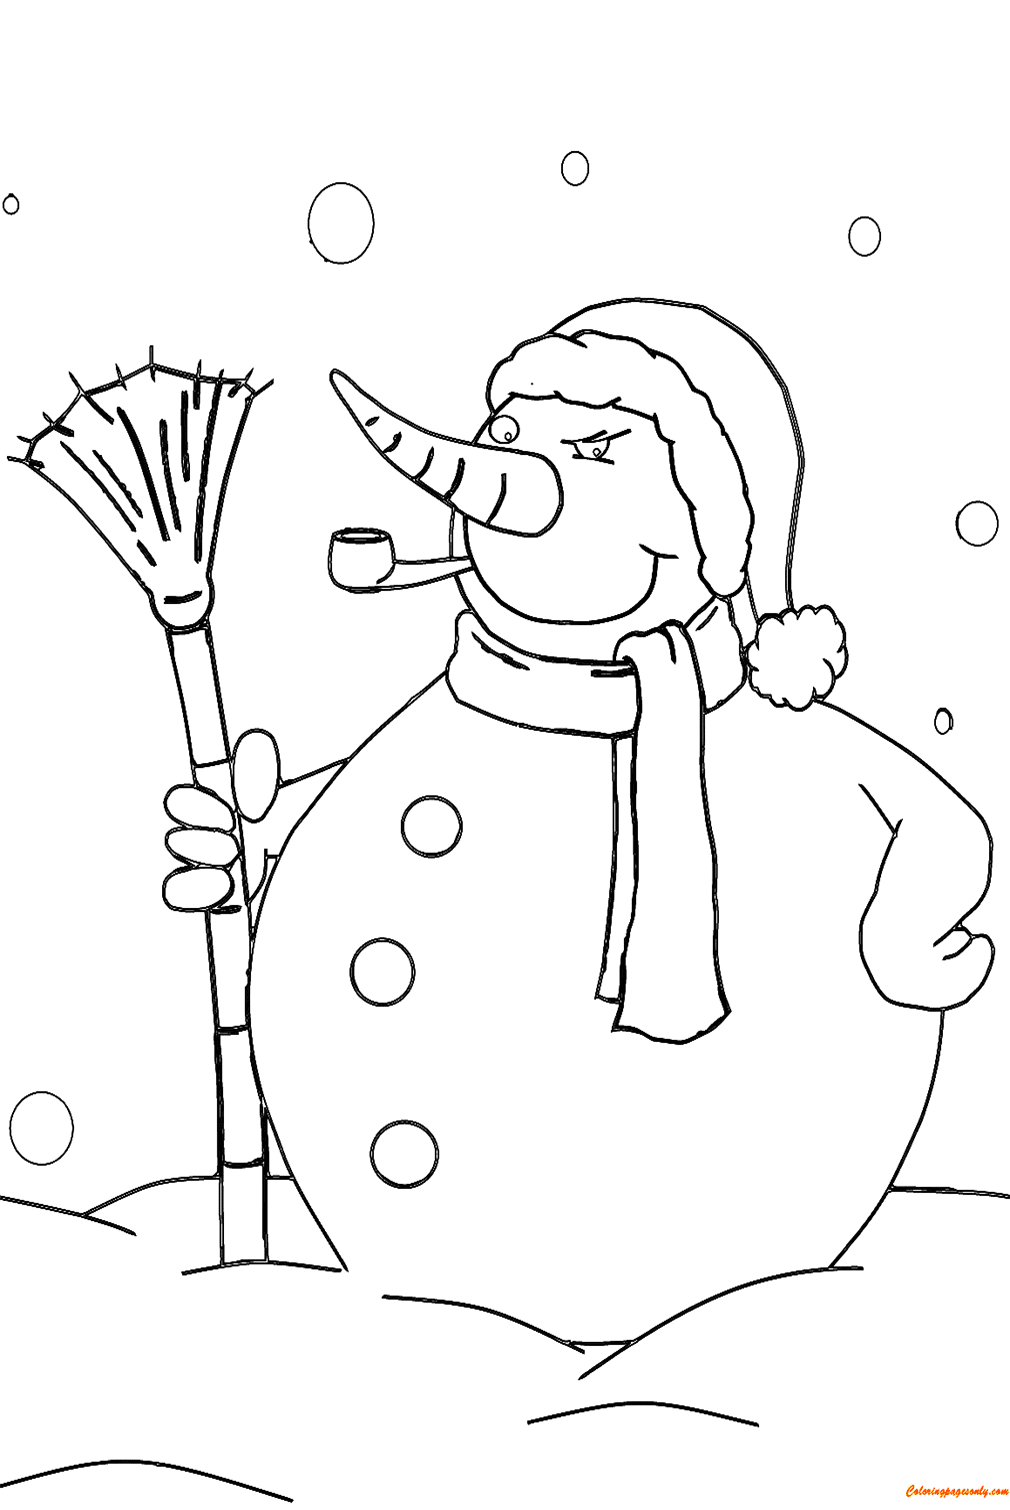 Snowman With Pipe And Broom Coloring Page